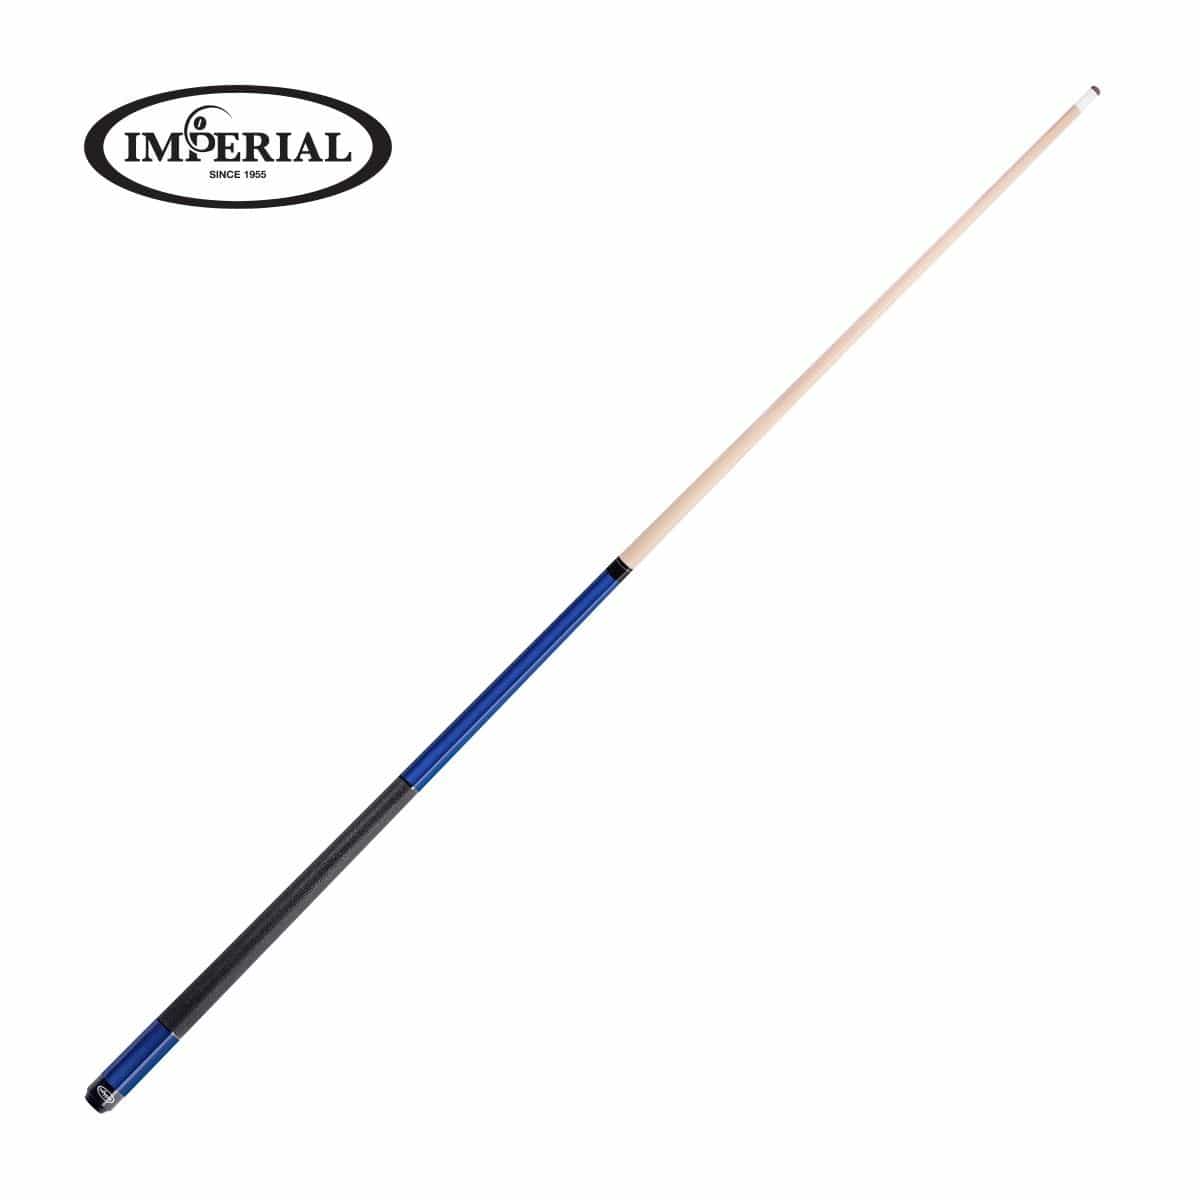 Imperial Billiards Accessories Imperial - Vision Series Blue Cue w/ Wrap* - 13-752-LW